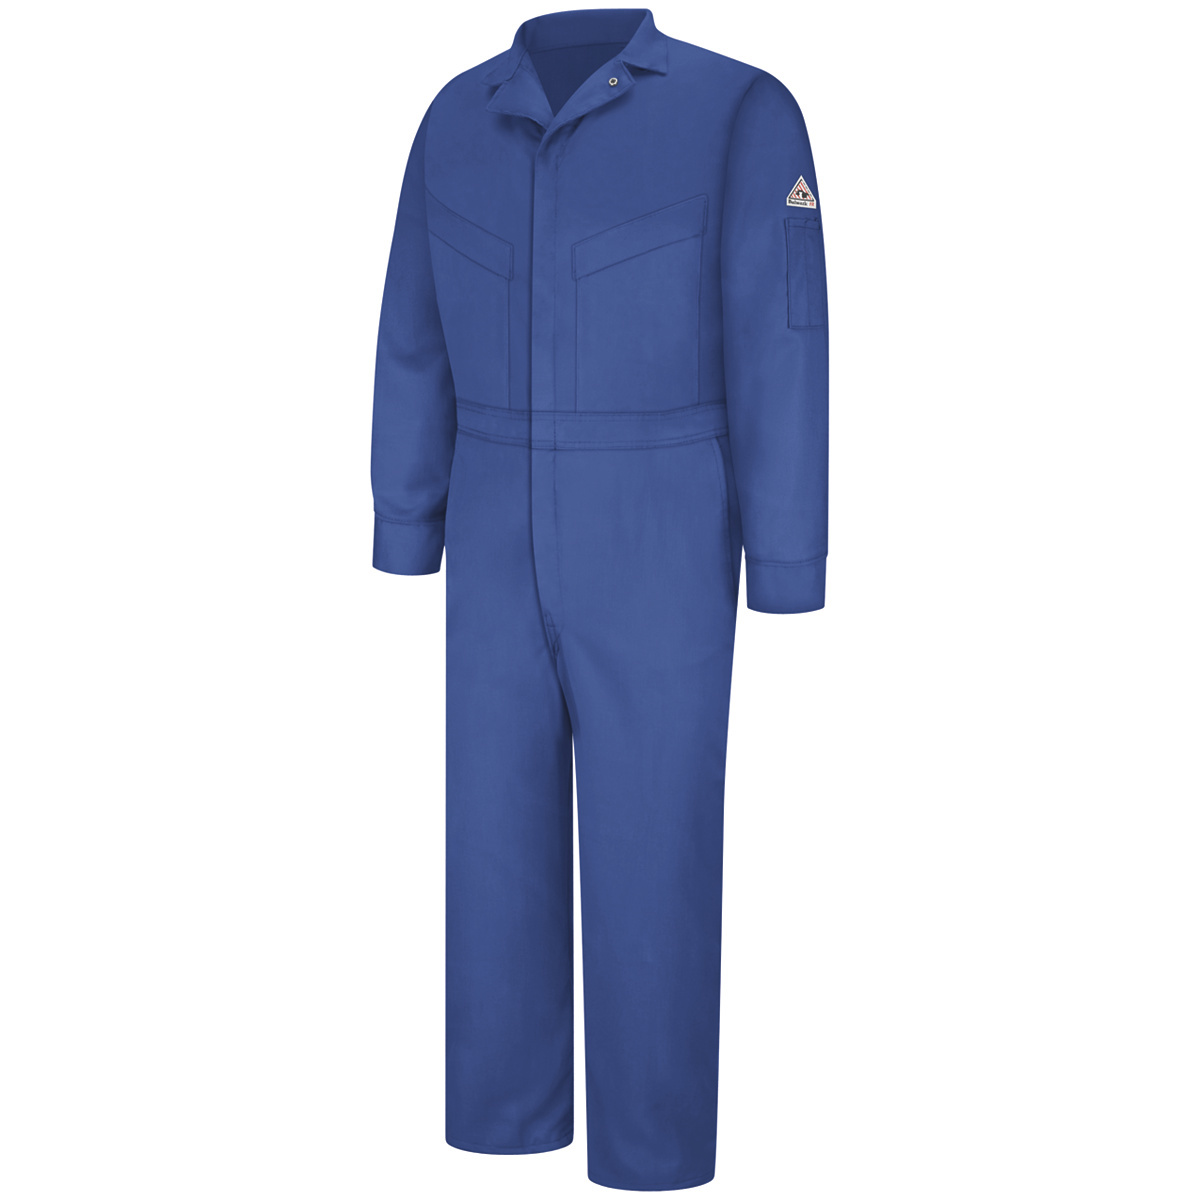 Bulwark® 50 Regular Royal Blue EXCEL FR® ComforTouch® Sateen/Cotton/Nylon Water Repellent Flame Resistant Coveralls With Zipper